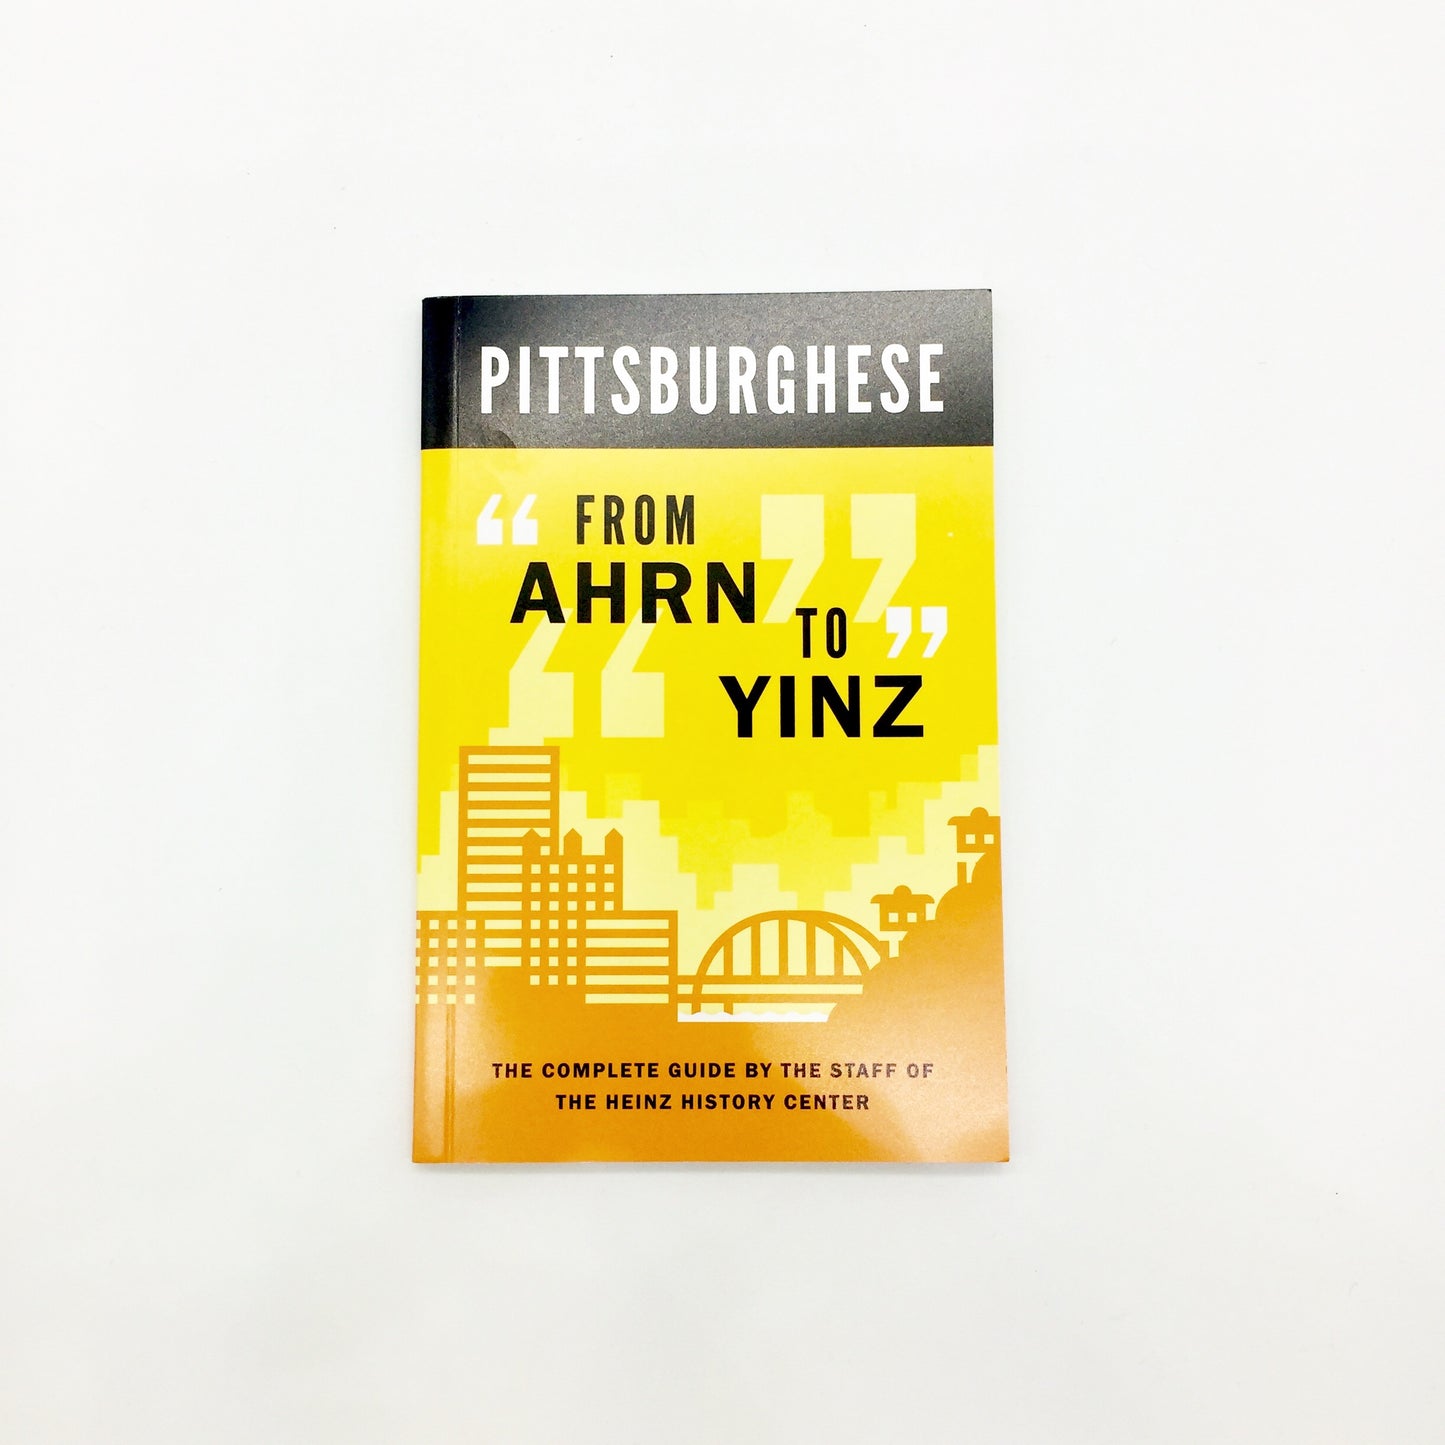 Pittsburghese From Ahrn to Yinz